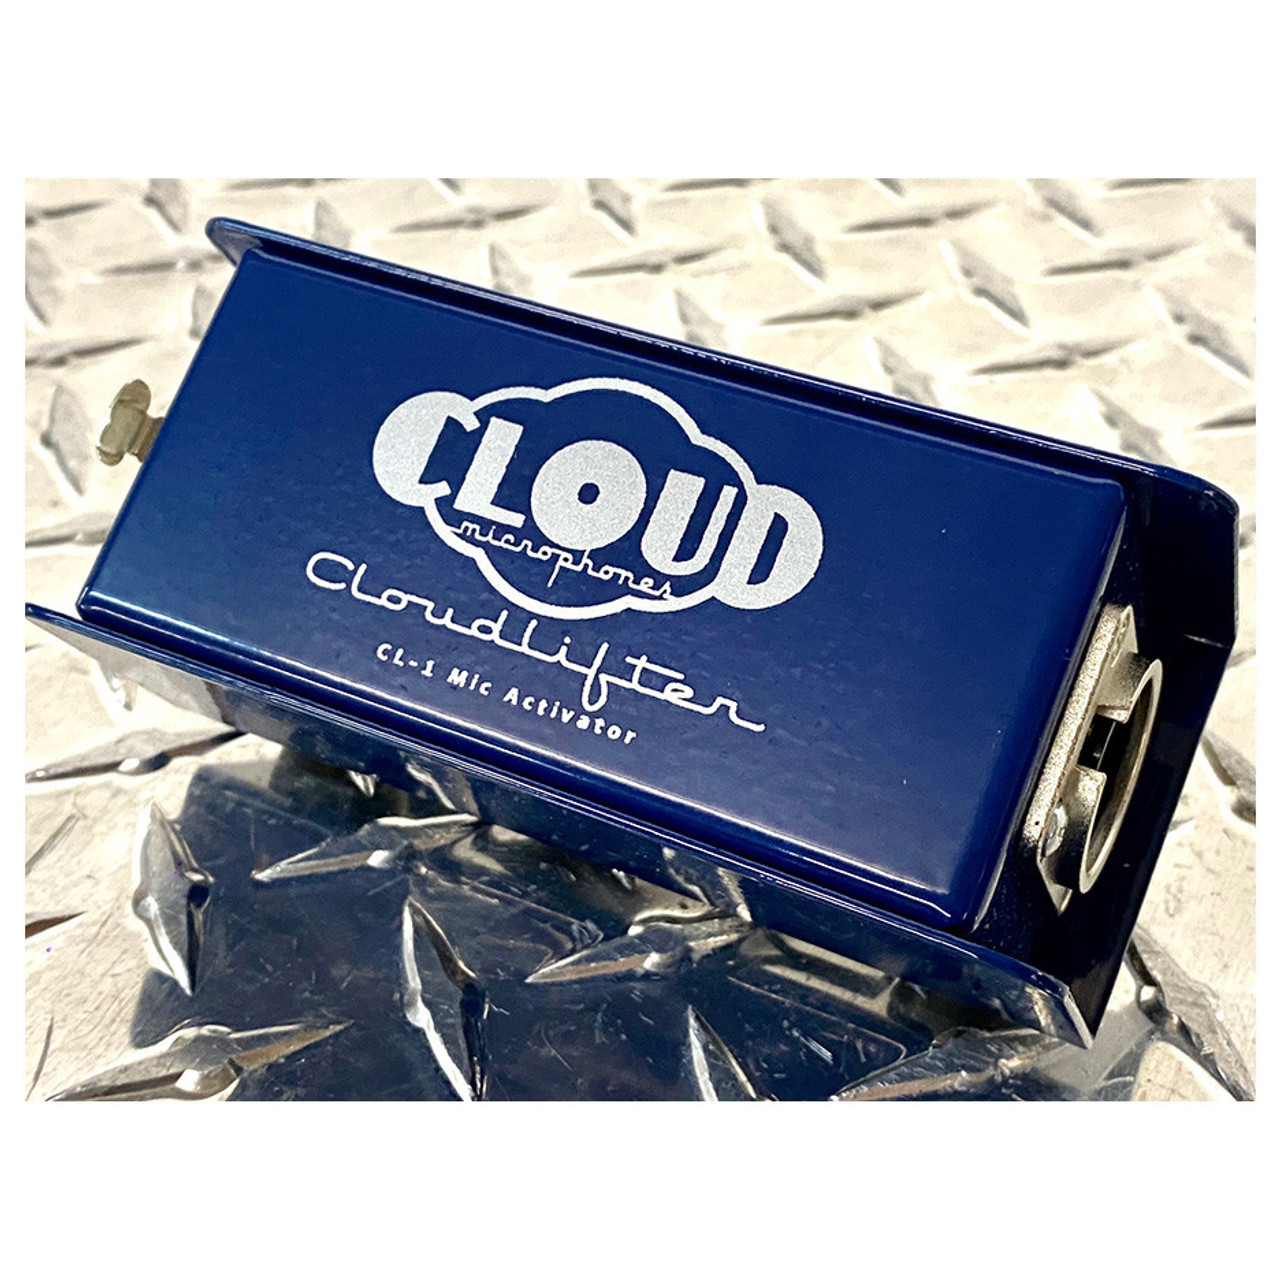 One　EMI　Activator　Mic　Channel　CL-1　Cloudlifter　Audio